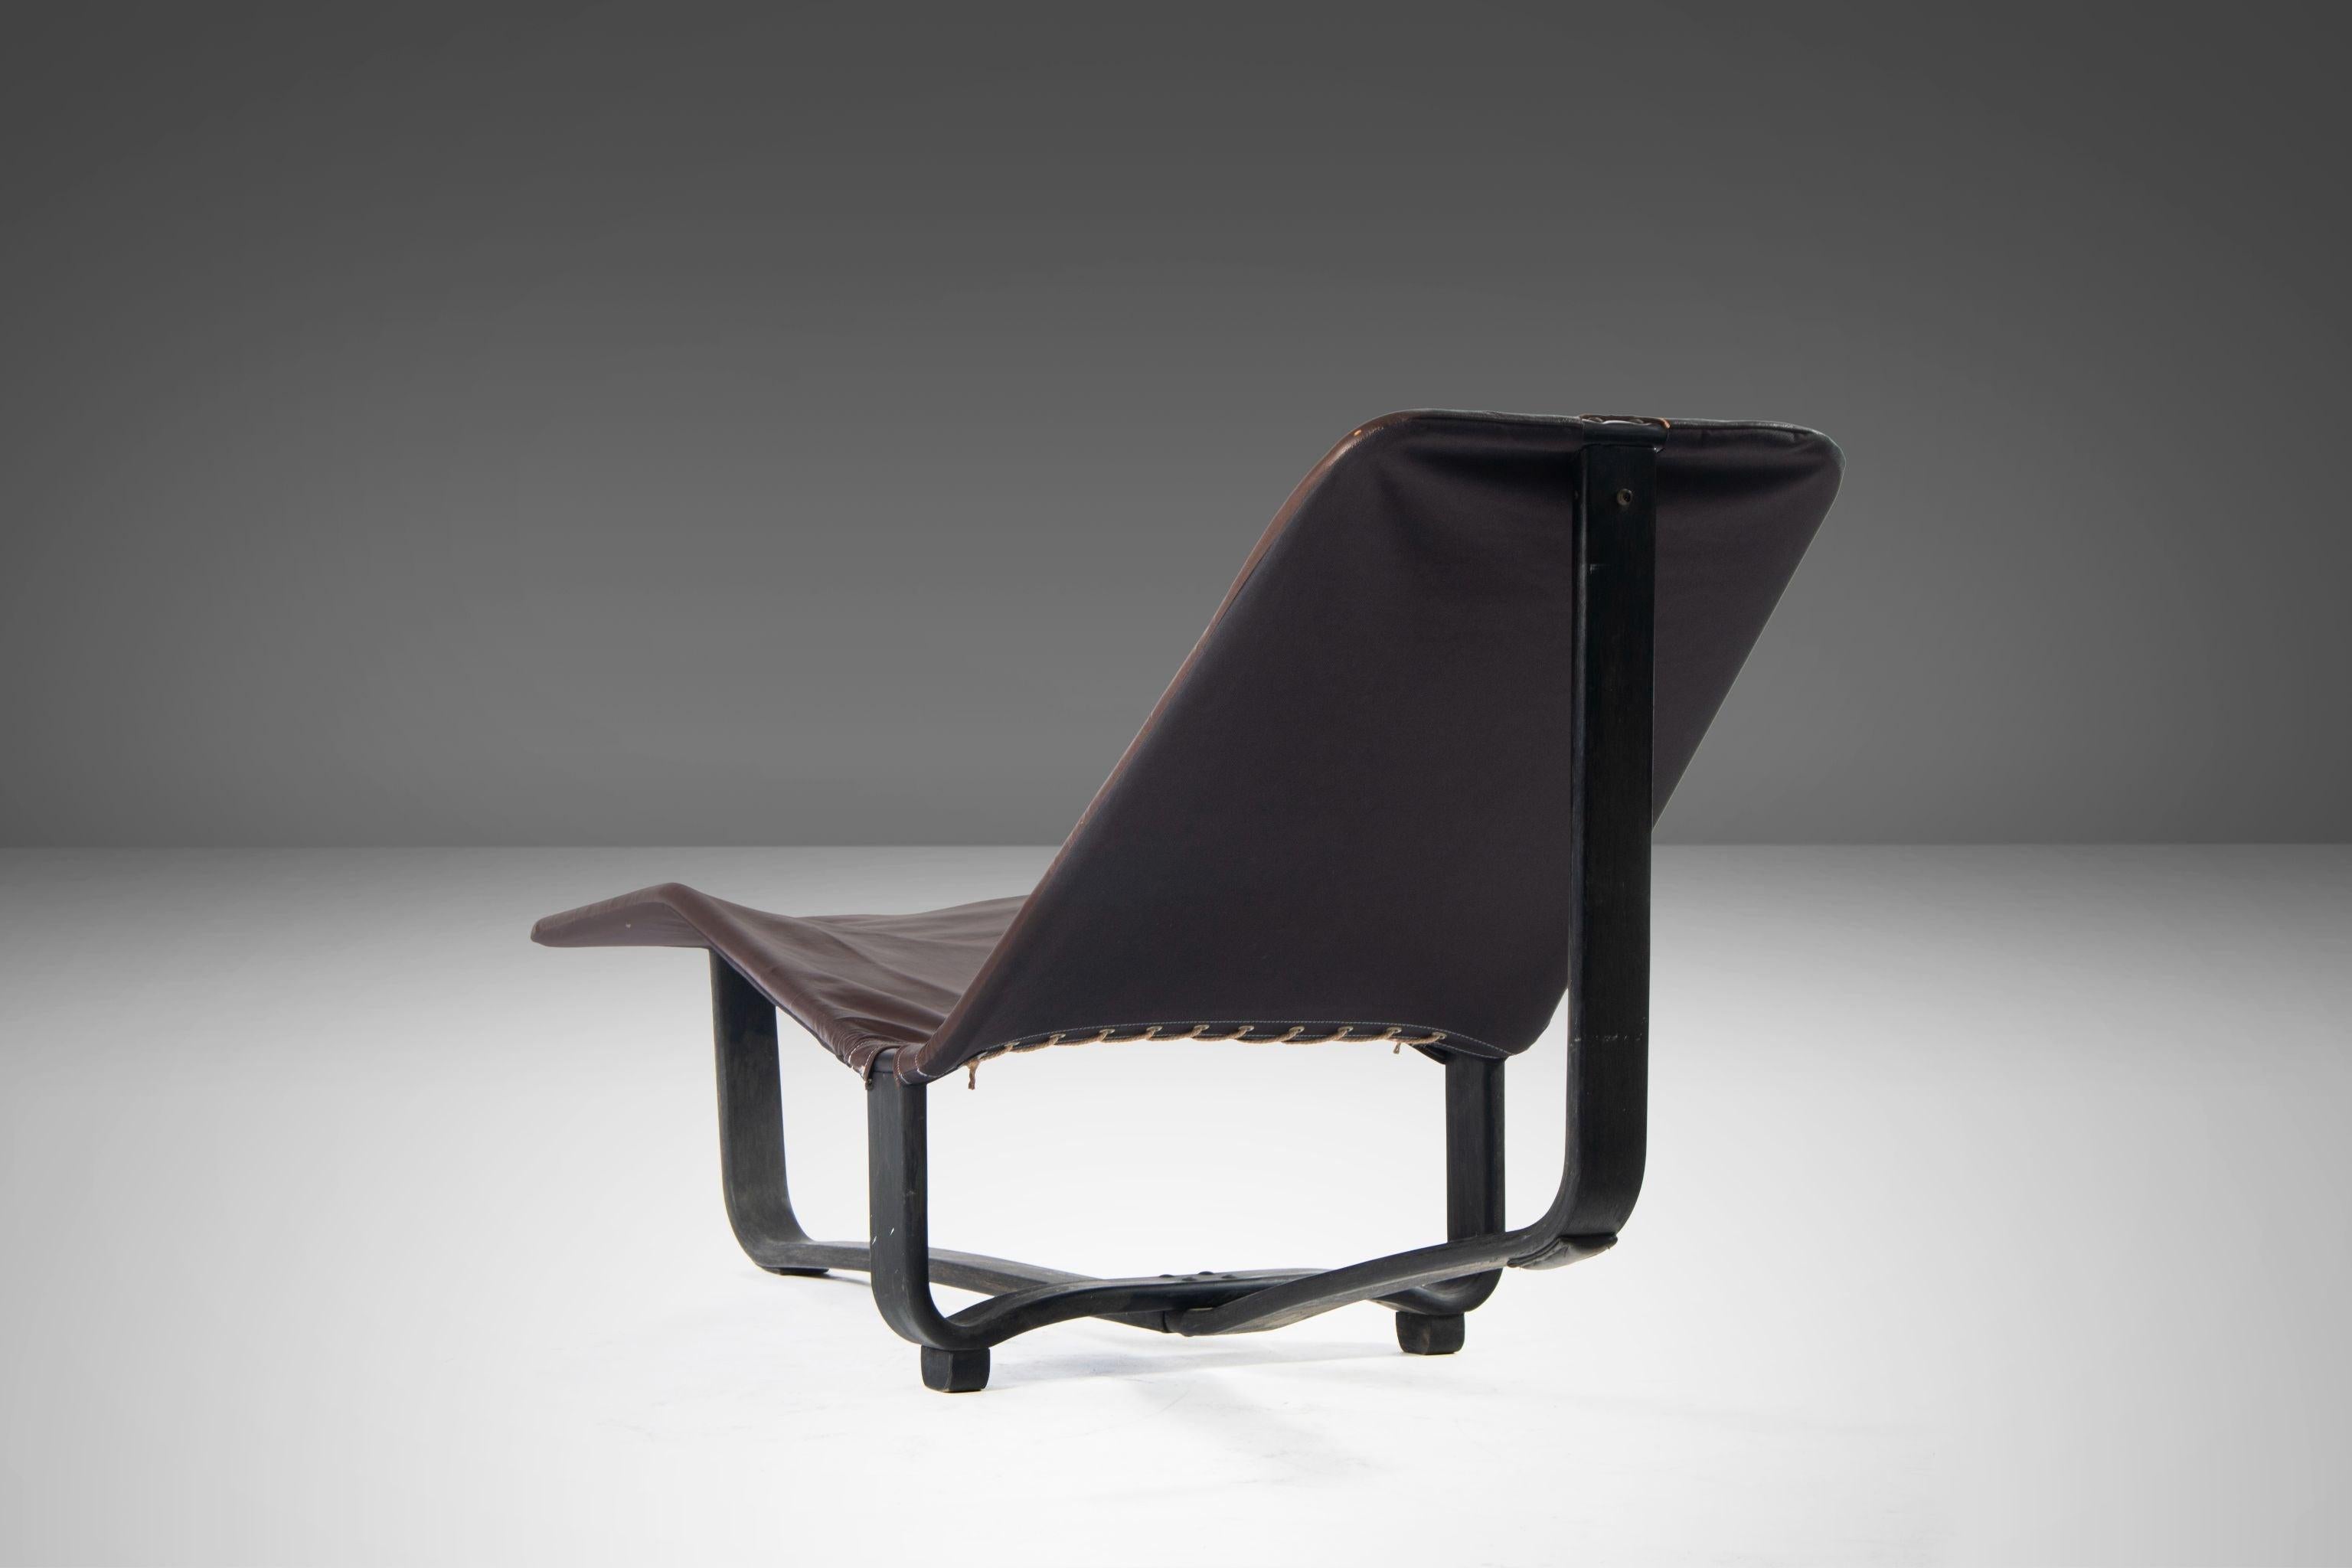 Norwegian Westnofa Chaise Lounge Chair by Ingmar & Knut Relling for Vestlandske, c. 1970's For Sale